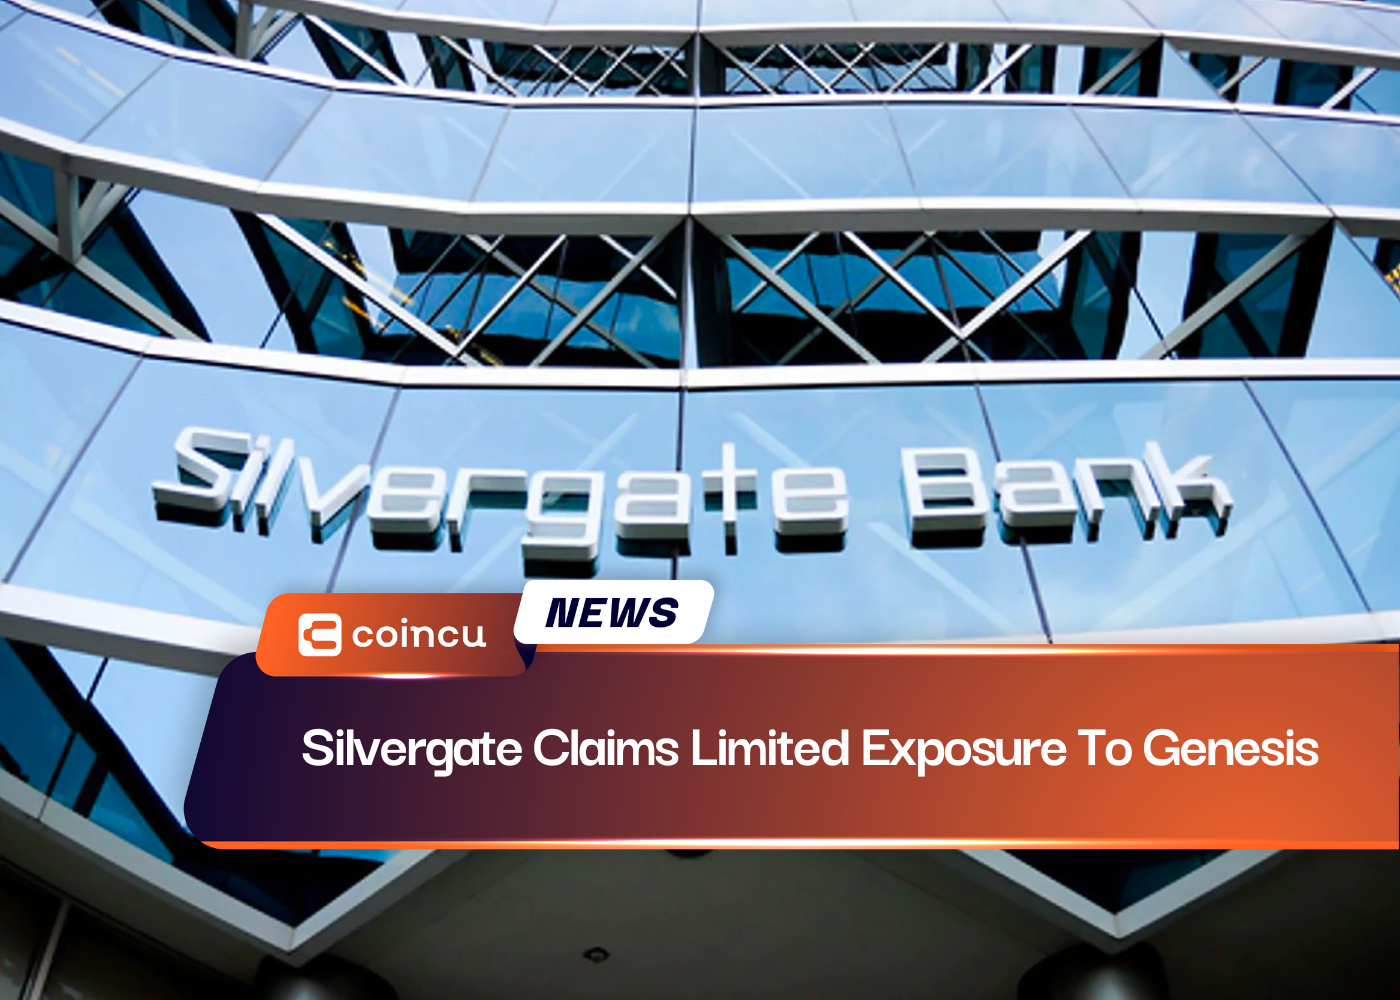 Silvergate Claims Limited Exposure To Genesis